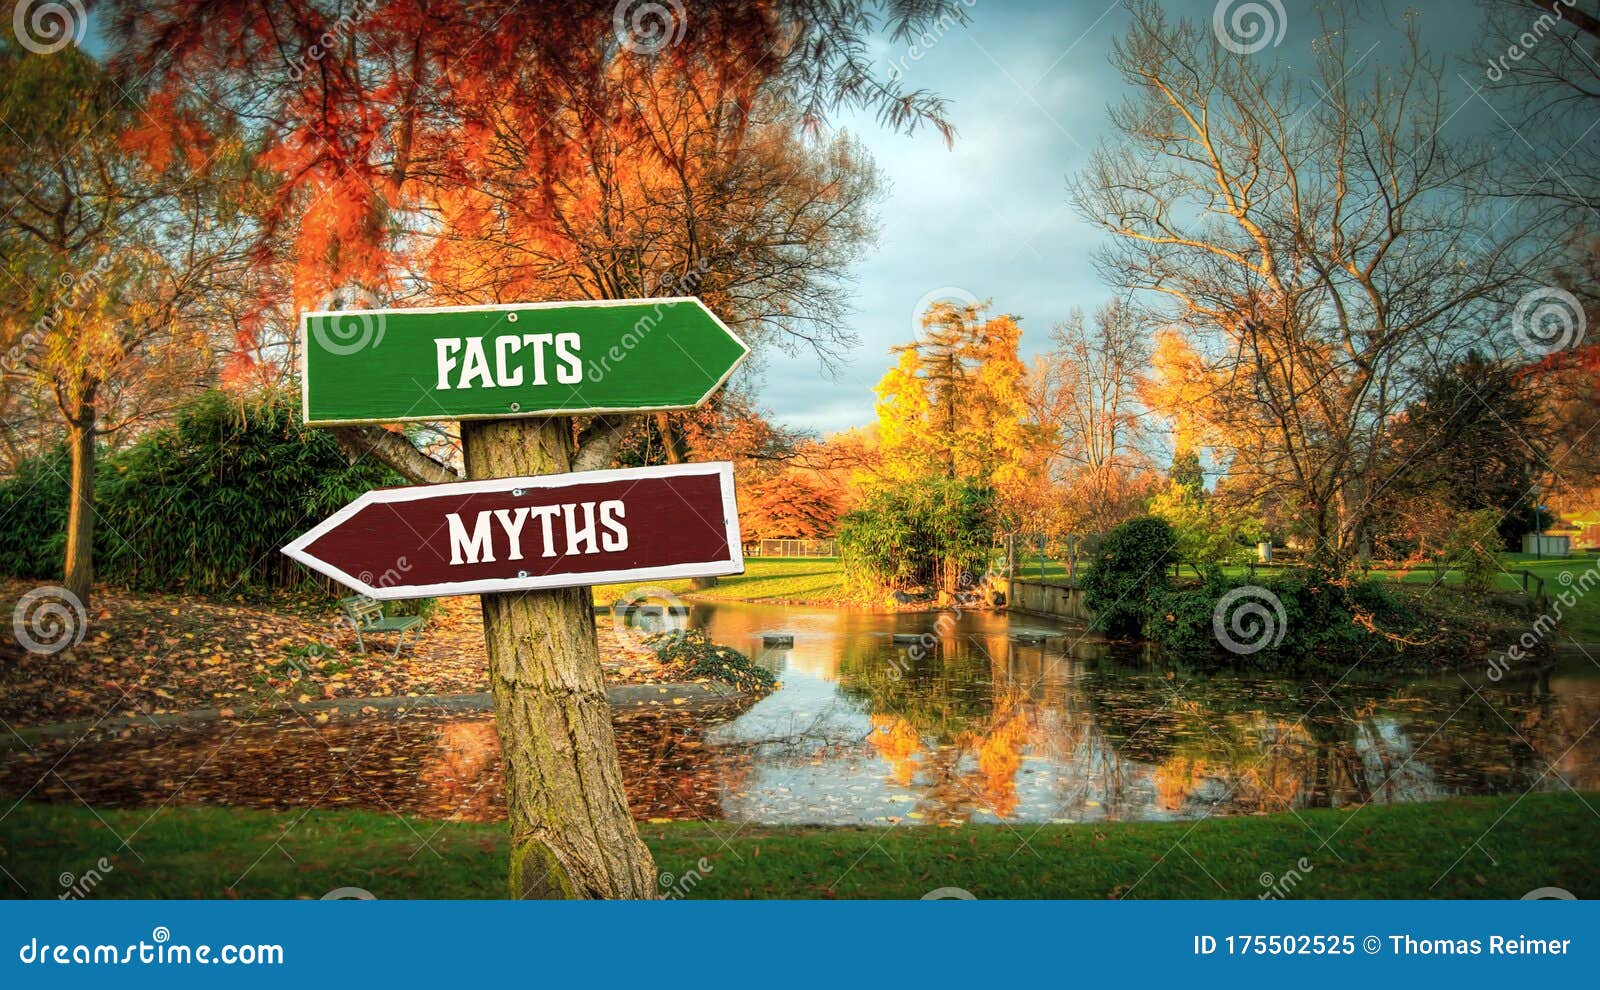 street sign to facts versus myths